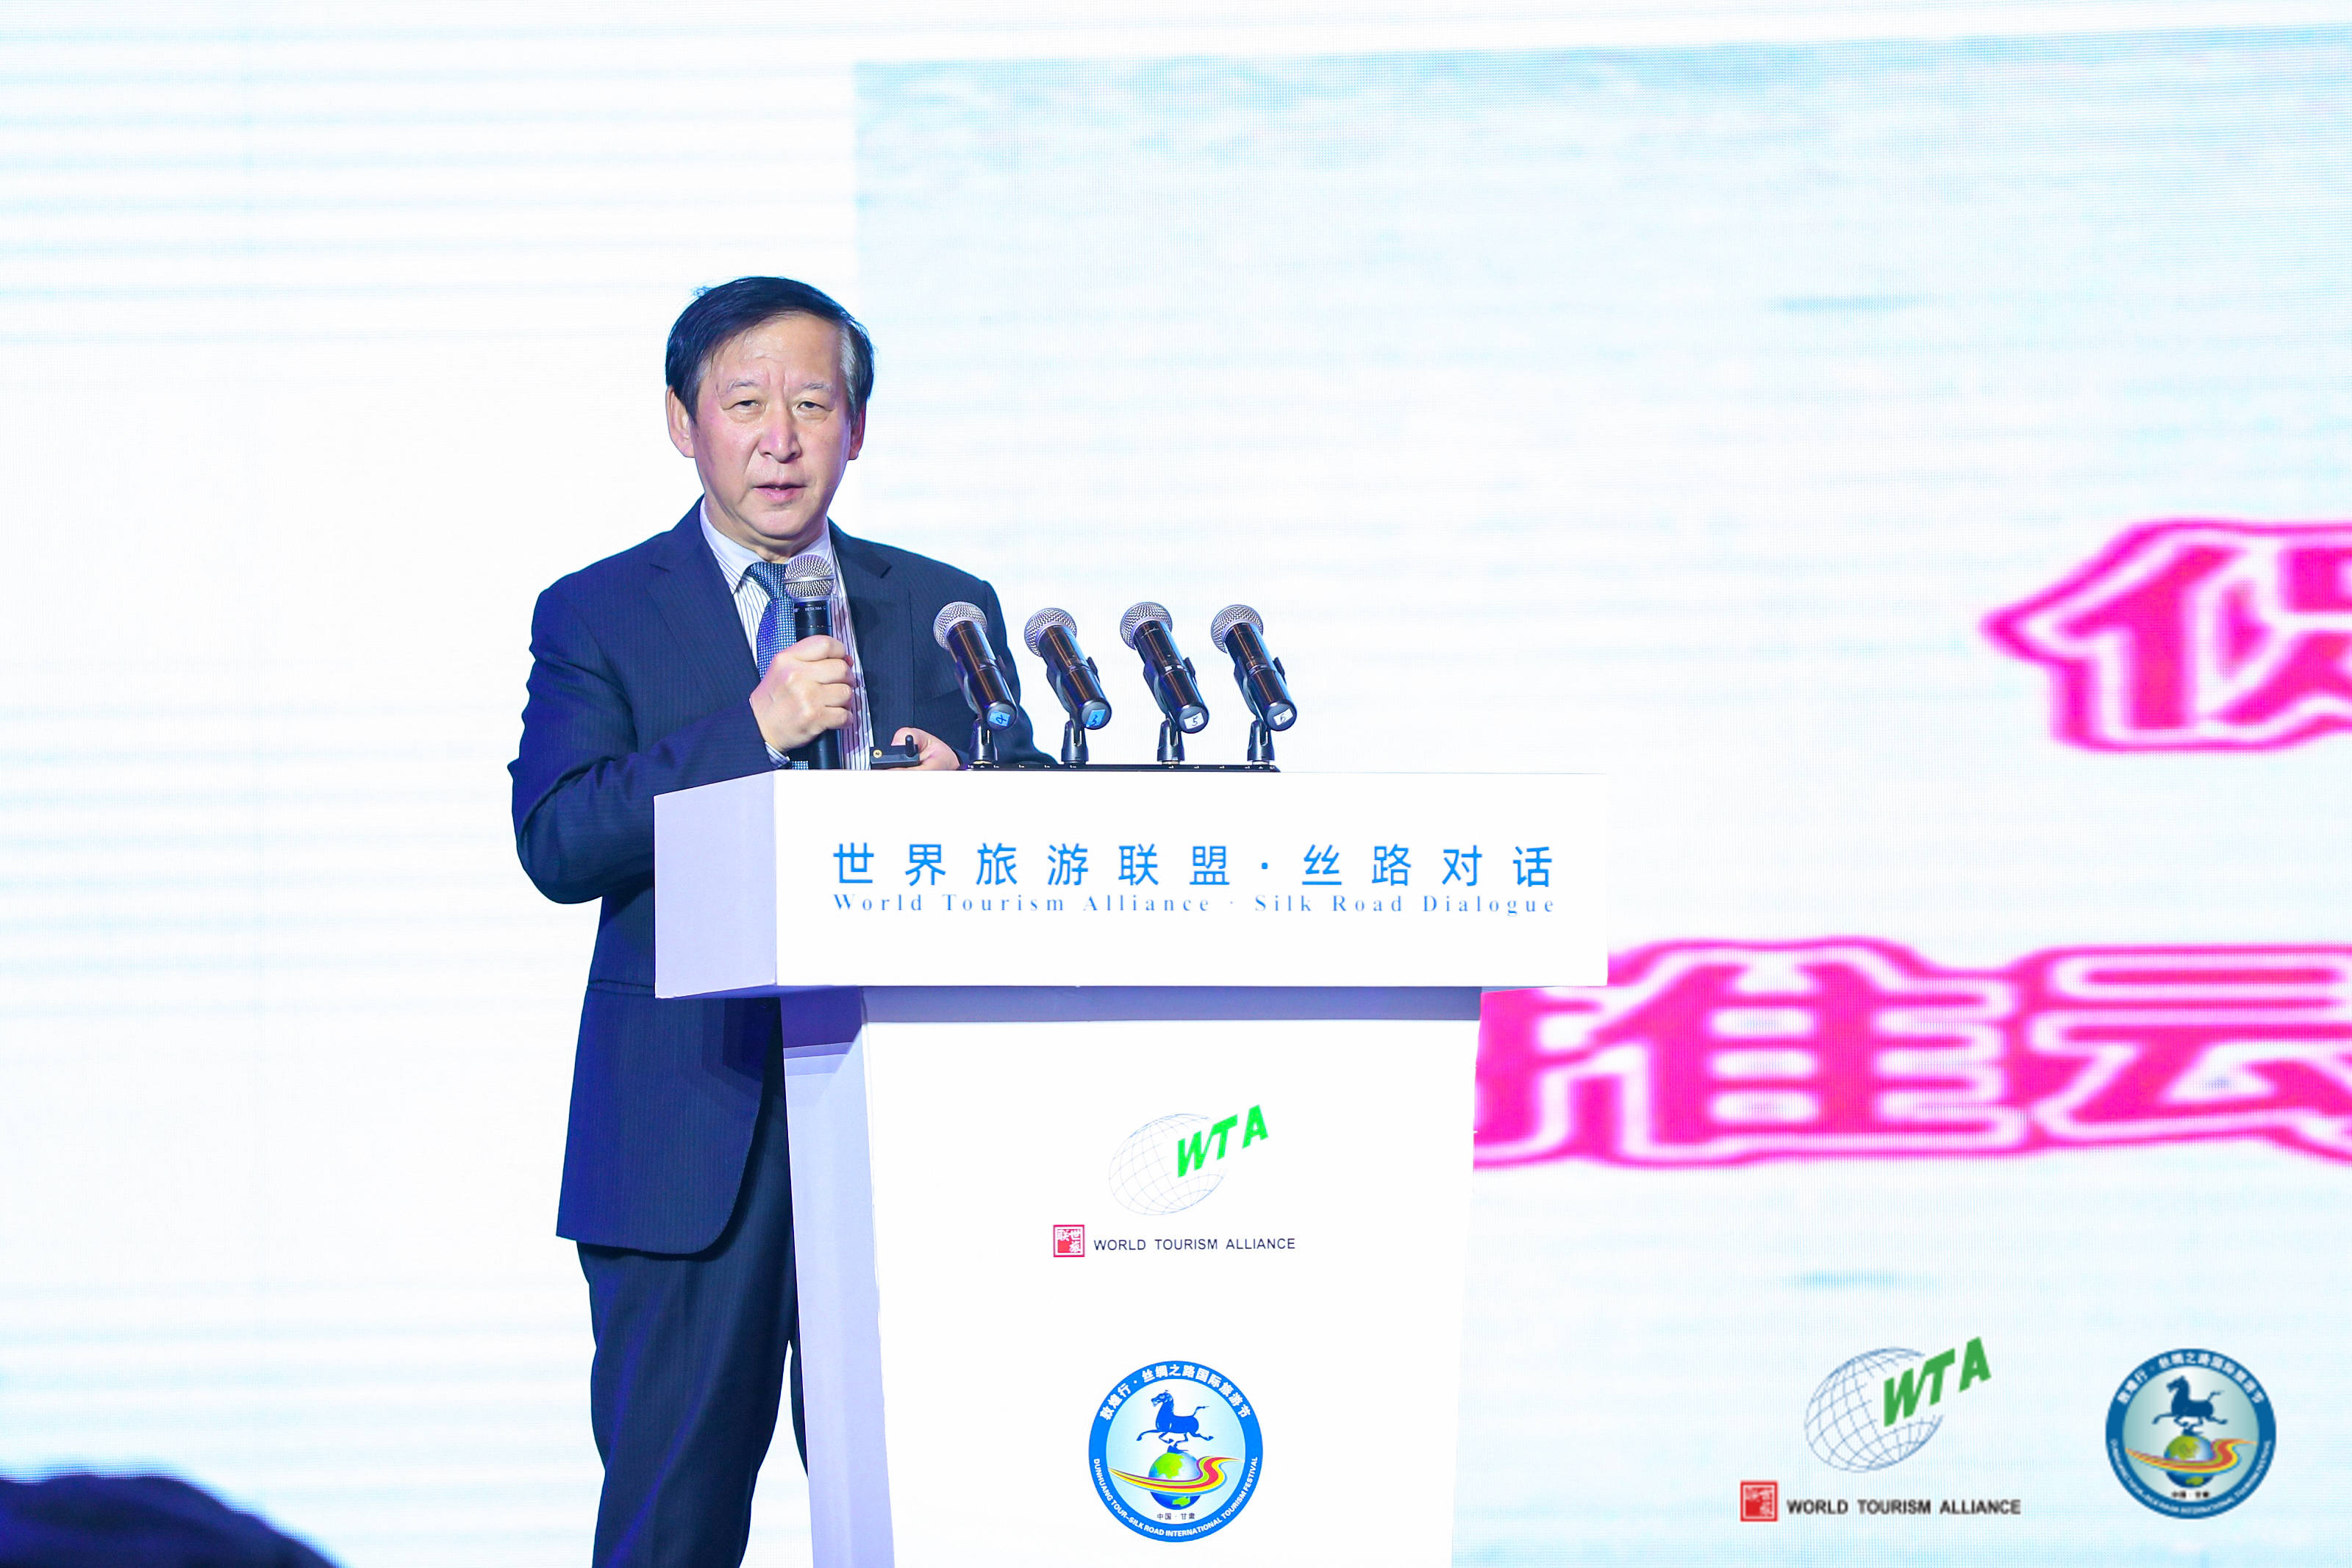 Yu Hongjun, Former Deputy Director of the International Department of the CPC Central Committee